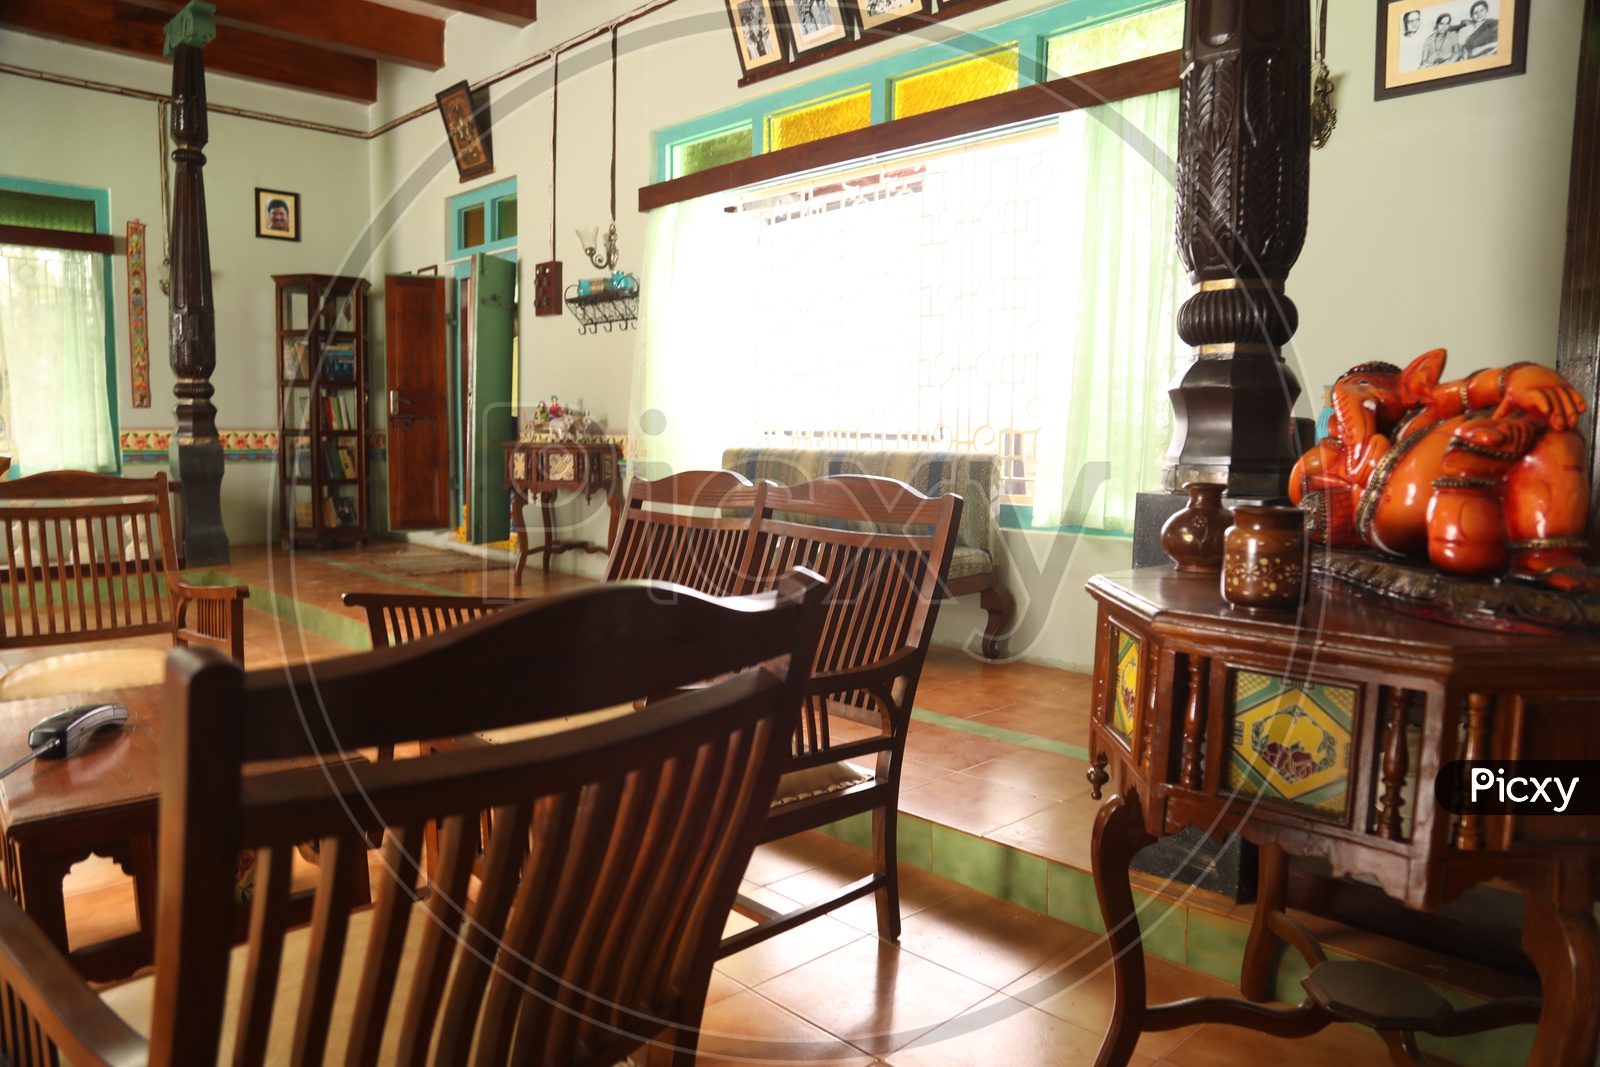 Living Room in Rural Area Houses With wooden Chairs and Tables